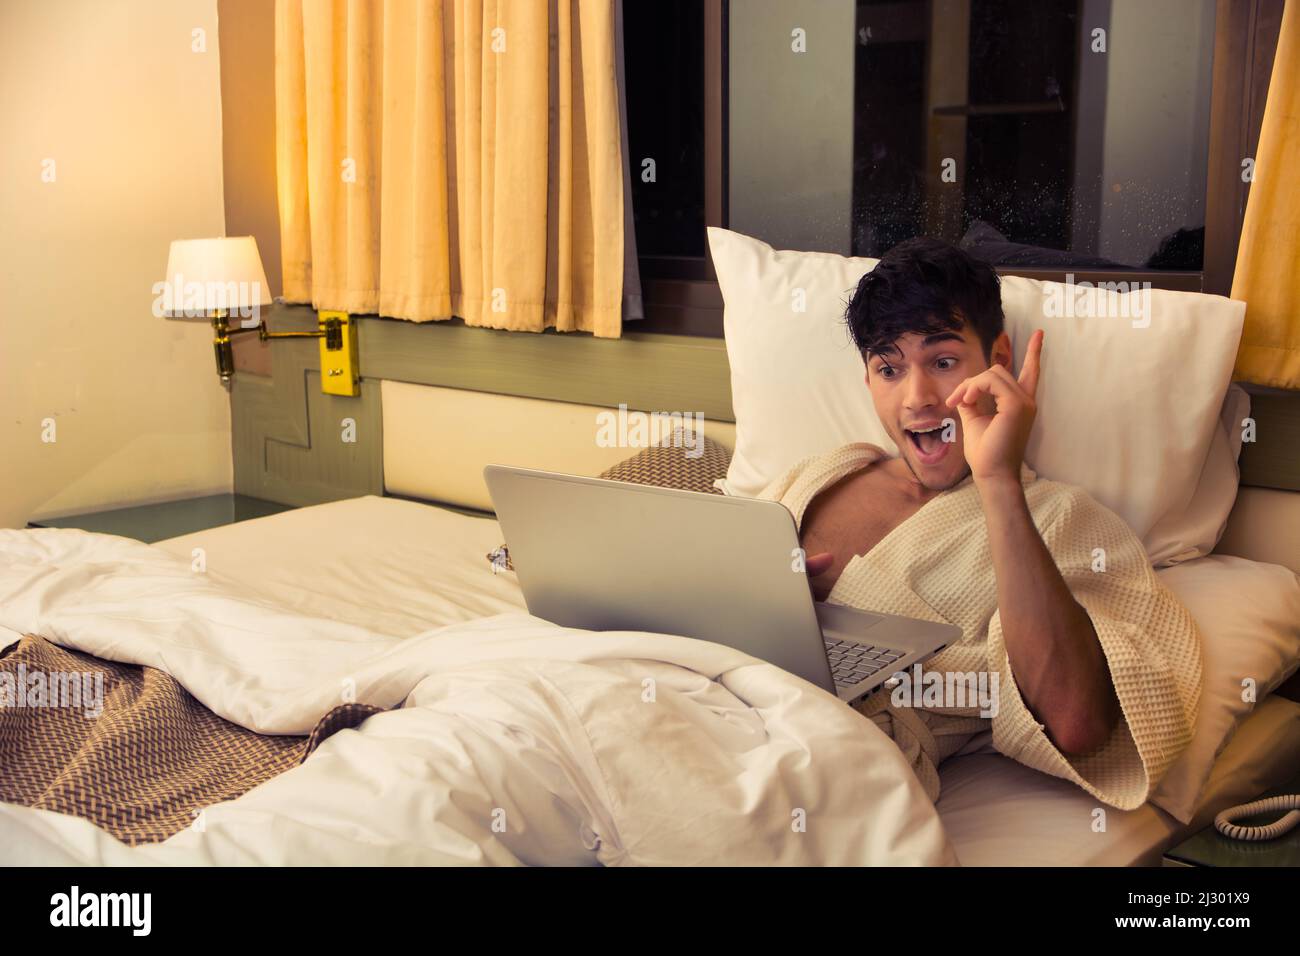 Young Male College or University Student Doing Homework, in Bedroom Stock Photo